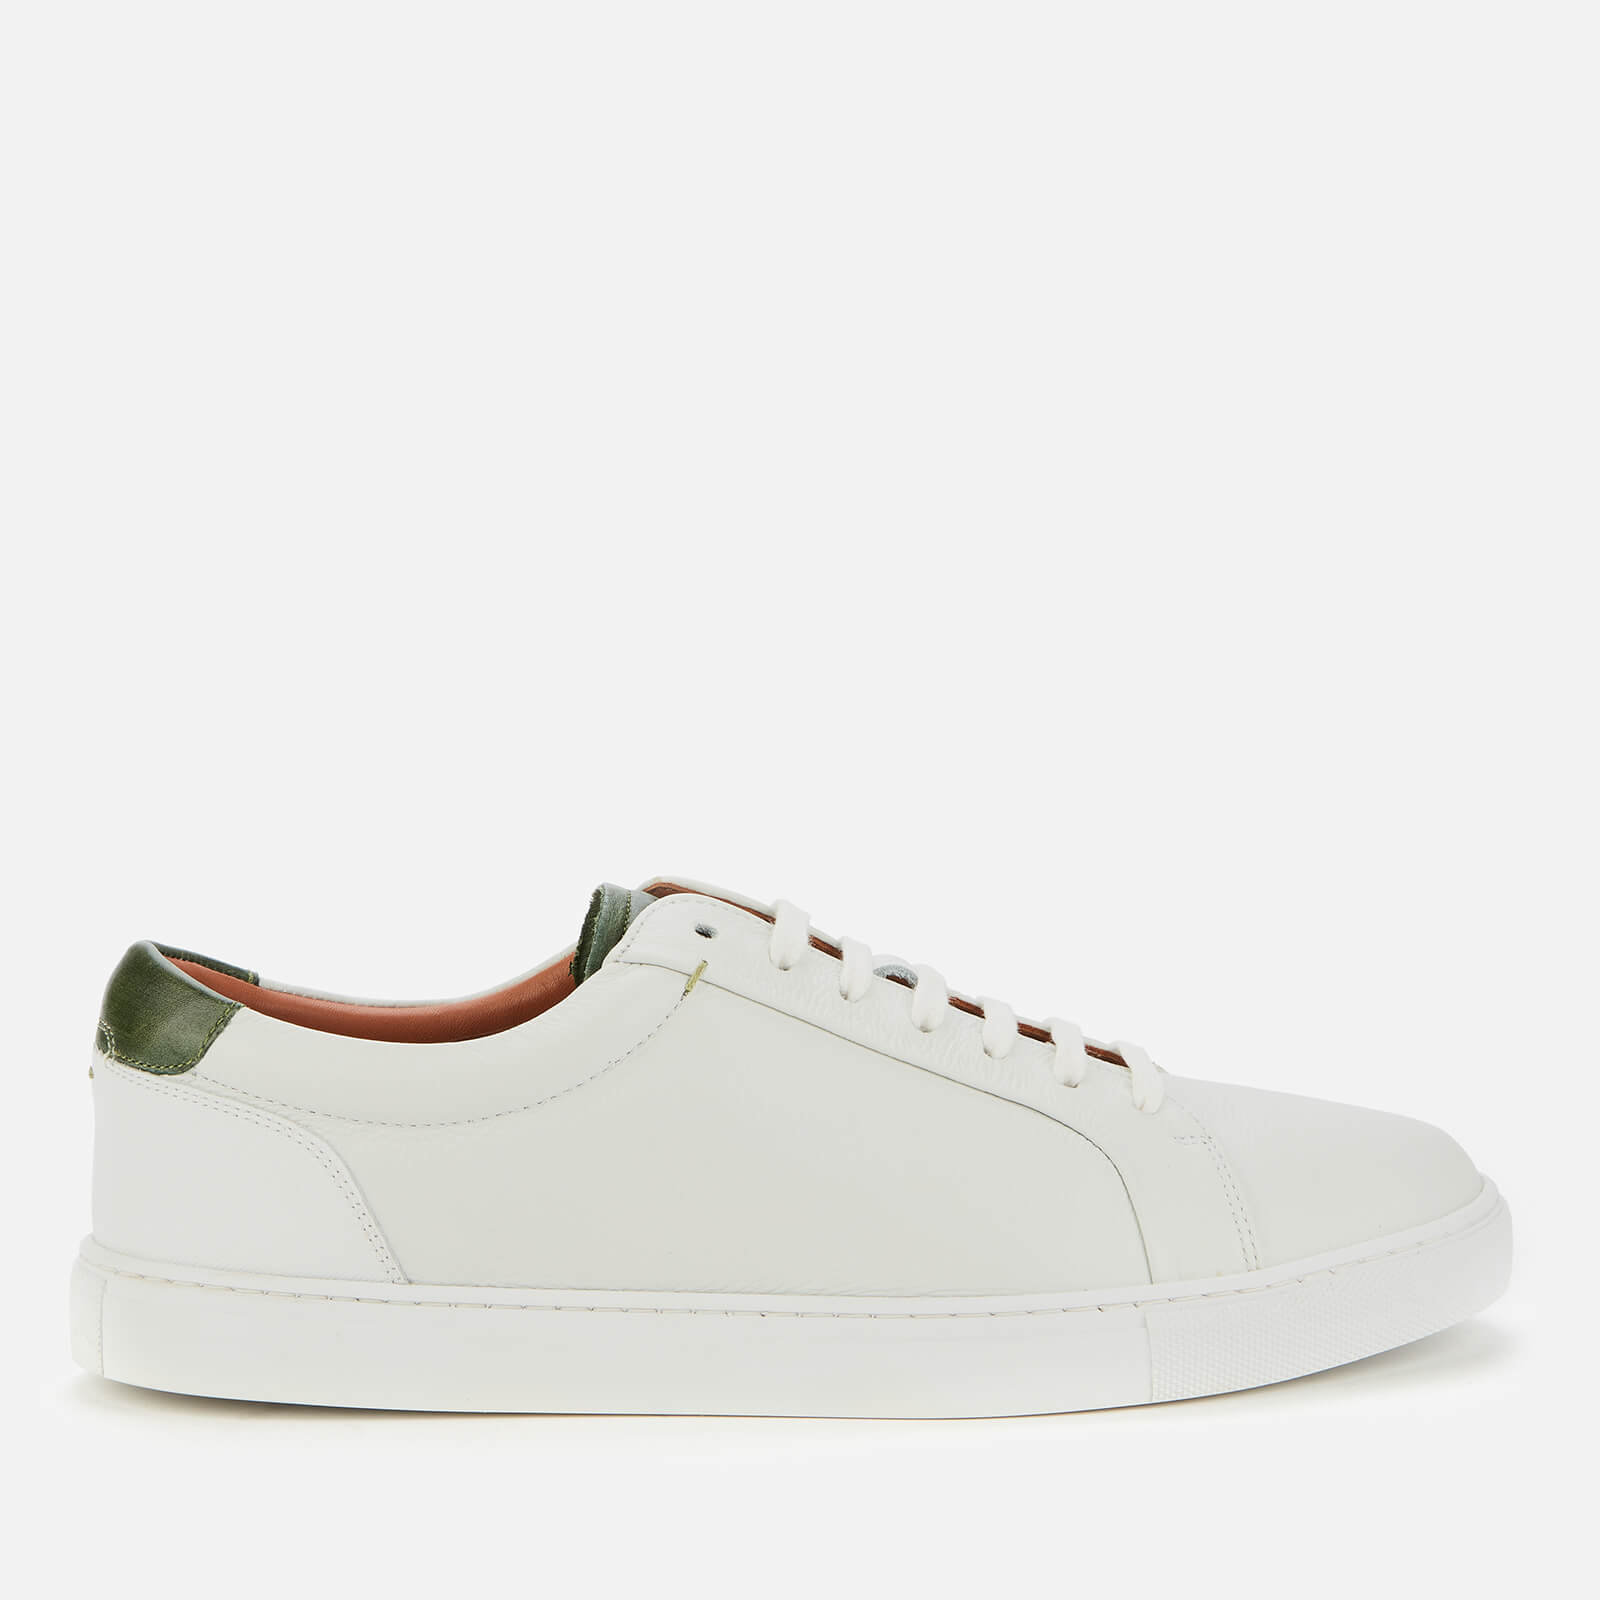 Ted Baker Men's Udamo Cupsole Trainers - White - UK 7